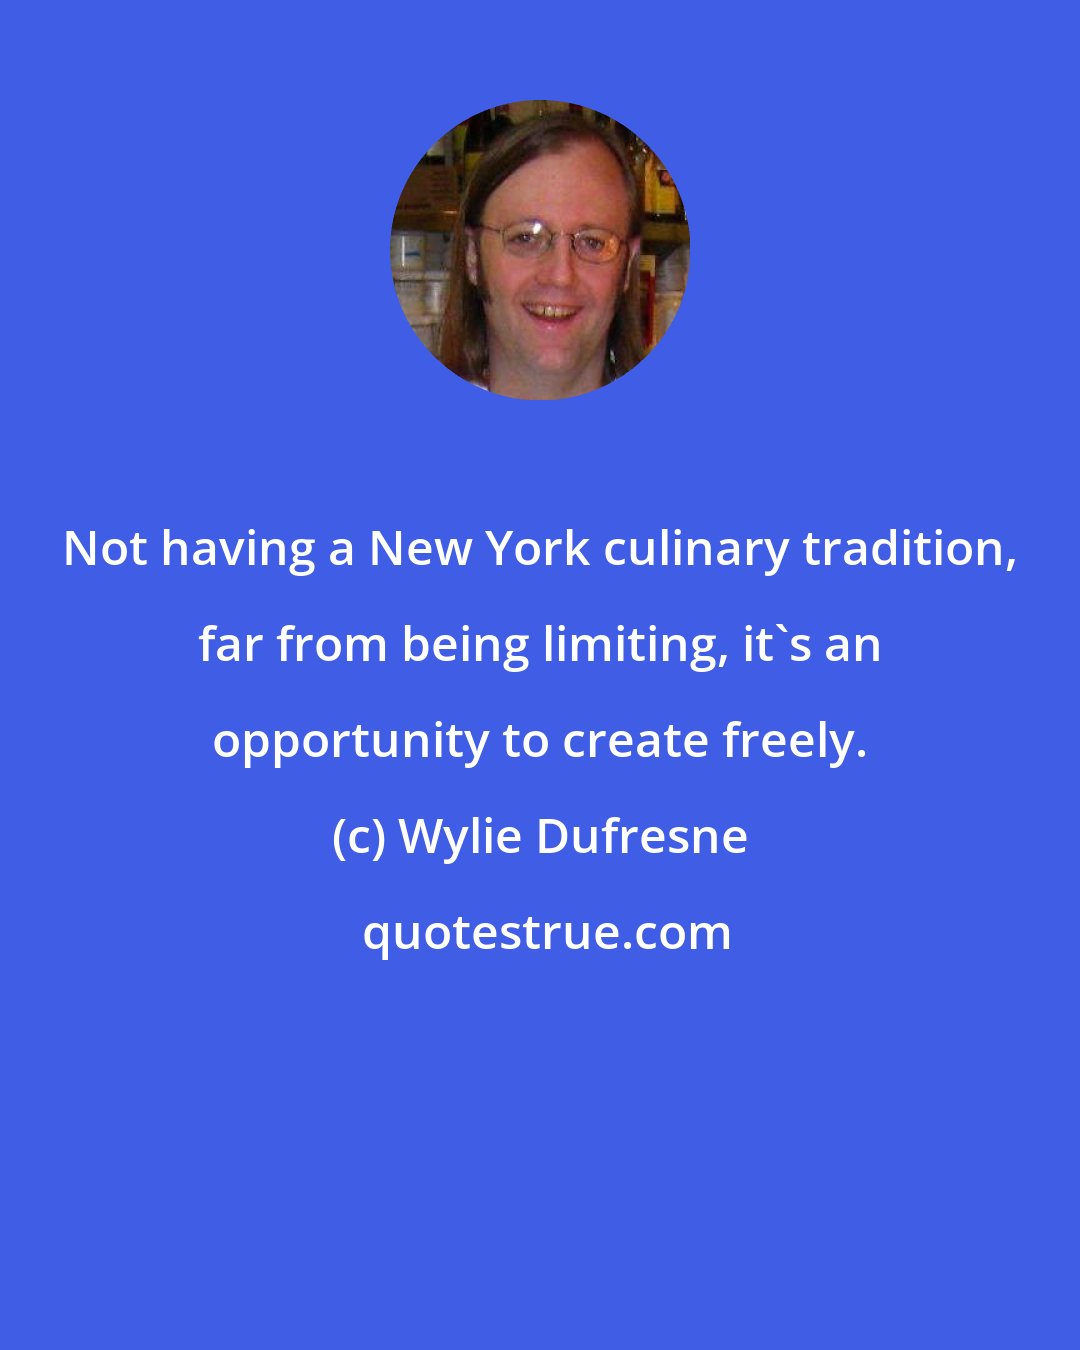 Wylie Dufresne: Not having a New York culinary tradition, far from being limiting, it's an opportunity to create freely.